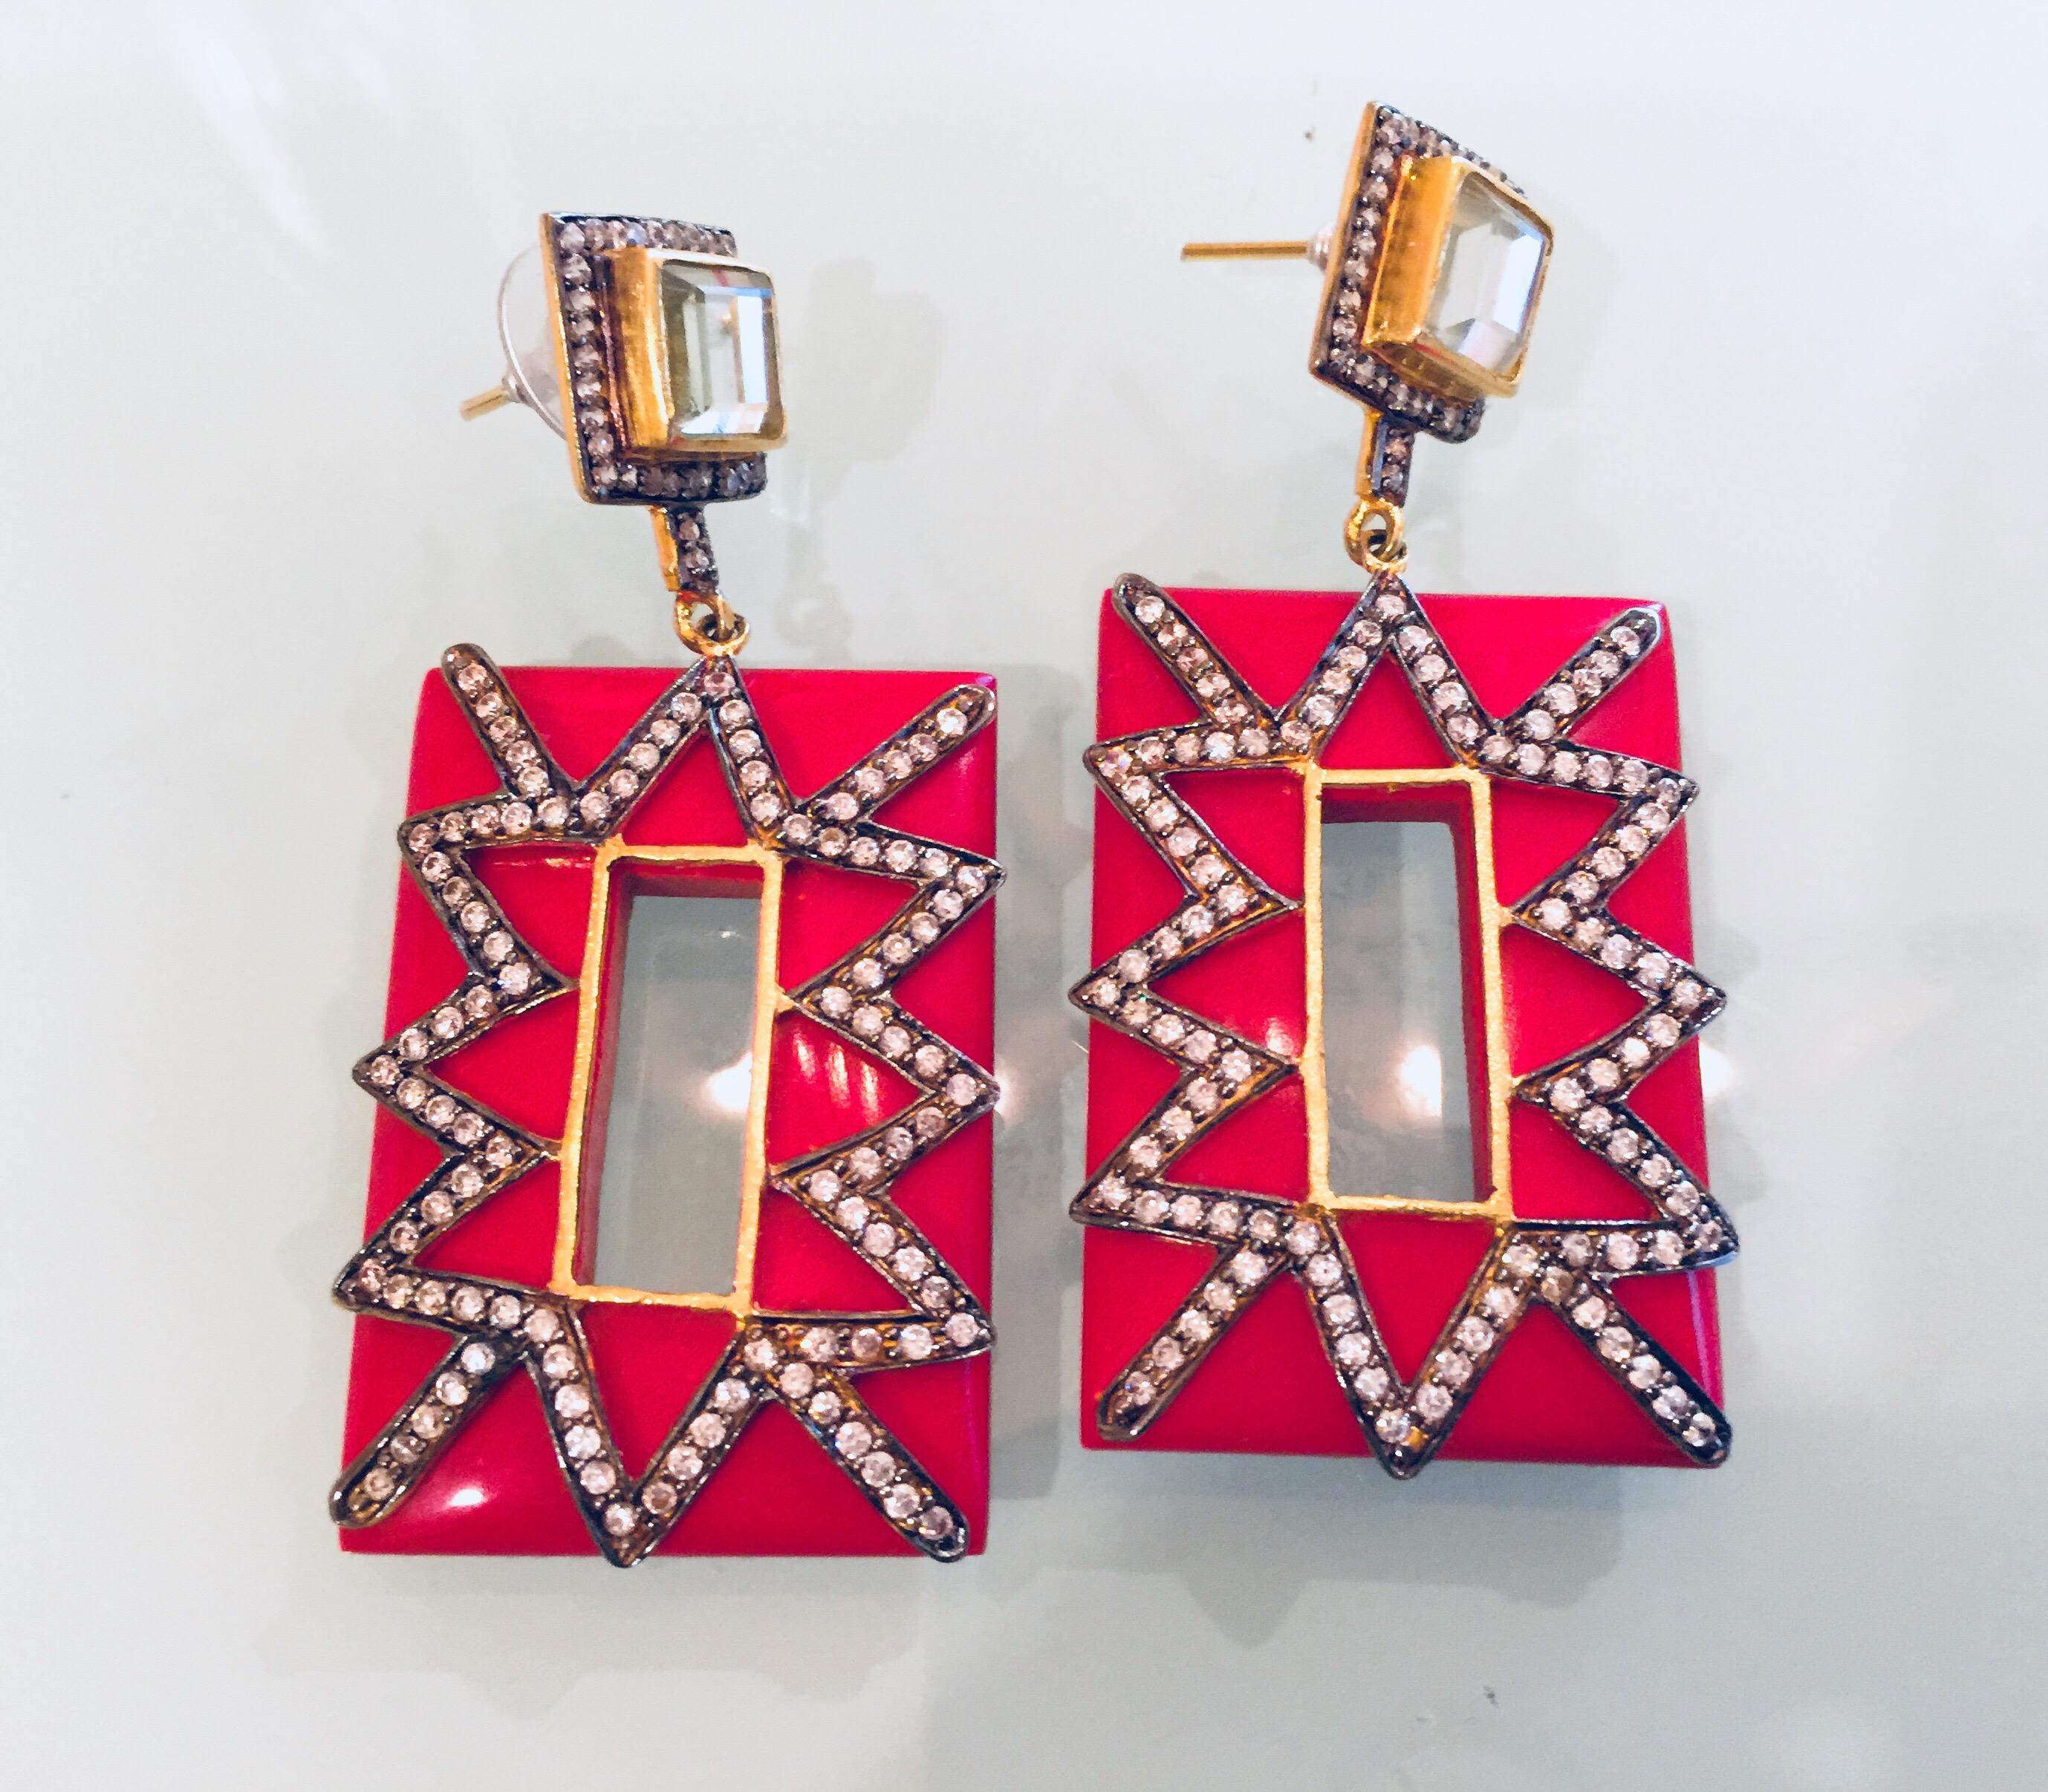 Gorgeous gold, red and cubic zircon Audrey earrings. A thick red, rectangular outline is enhanced with rows of zigzag CZ stones for a dazzling sparkle fest. The clear, square crystal at the top is surrounded by small CZs and supports the post